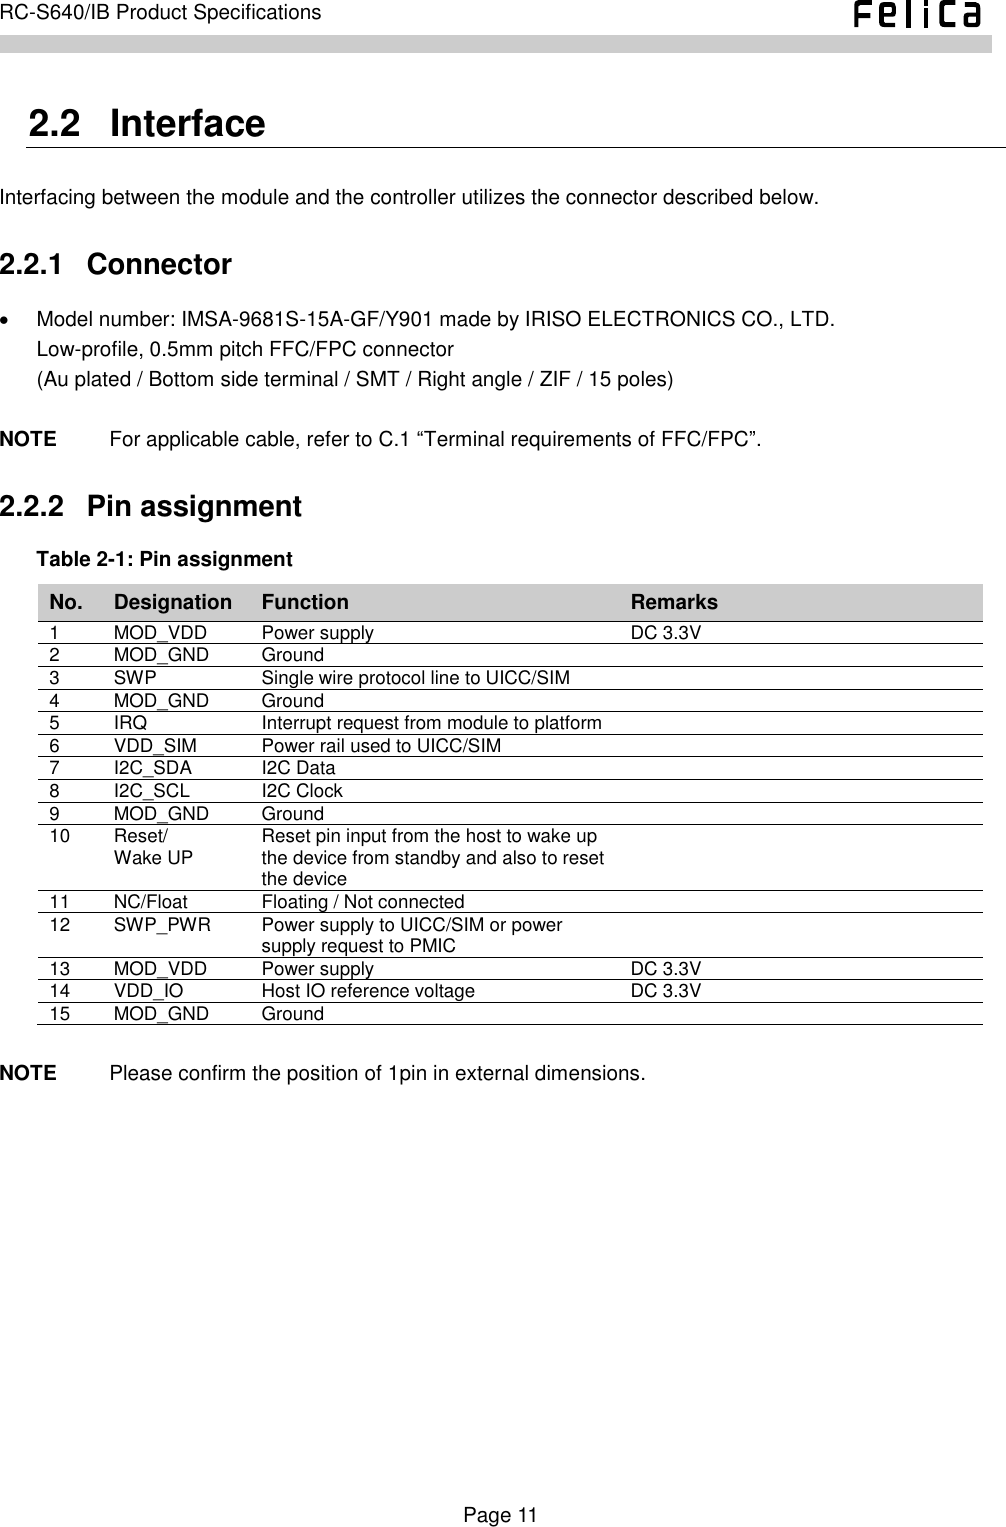    Page 11     RC-S640/IB Product Specifications    2.2   Interface Interfacing between the module and the controller utilizes the connector described below. 2.2.1   Connector   Model number: IMSA-9681S-15A-GF/Y901 made by IRISO ELECTRONICS CO., LTD. Low-profile, 0.5mm pitch FFC/FPC connector (Au plated / Bottom side terminal / SMT / Right angle / ZIF / 15 poles)  NOTE          For applicable cable, refer to C.1 “Terminal requirements of FFC/FPC”. 2.2.2   Pin assignment Table 2-1: Pin assignment No. Designation Function Remarks 1 MOD_VDD Power supply DC 3.3V 2 MOD_GND Ground  3 SWP Single wire protocol line to UICC/SIM  4 MOD_GND Ground  5 IRQ Interrupt request from module to platform  6 VDD_SIM Power rail used to UICC/SIM  7 I2C_SDA I2C Data  8 I2C_SCL I2C Clock  9 MOD_GND Ground  10 Reset/ Wake UP Reset pin input from the host to wake up the device from standby and also to reset the device  11 NC/Float Floating / Not connected  12 SWP_PWR Power supply to UICC/SIM or power supply request to PMIC  13 MOD_VDD Power supply DC 3.3V 14 VDD_IO Host IO reference voltage DC 3.3V 15 MOD_GND Ground   NOTE          Please confirm the position of 1pin in external dimensions.  